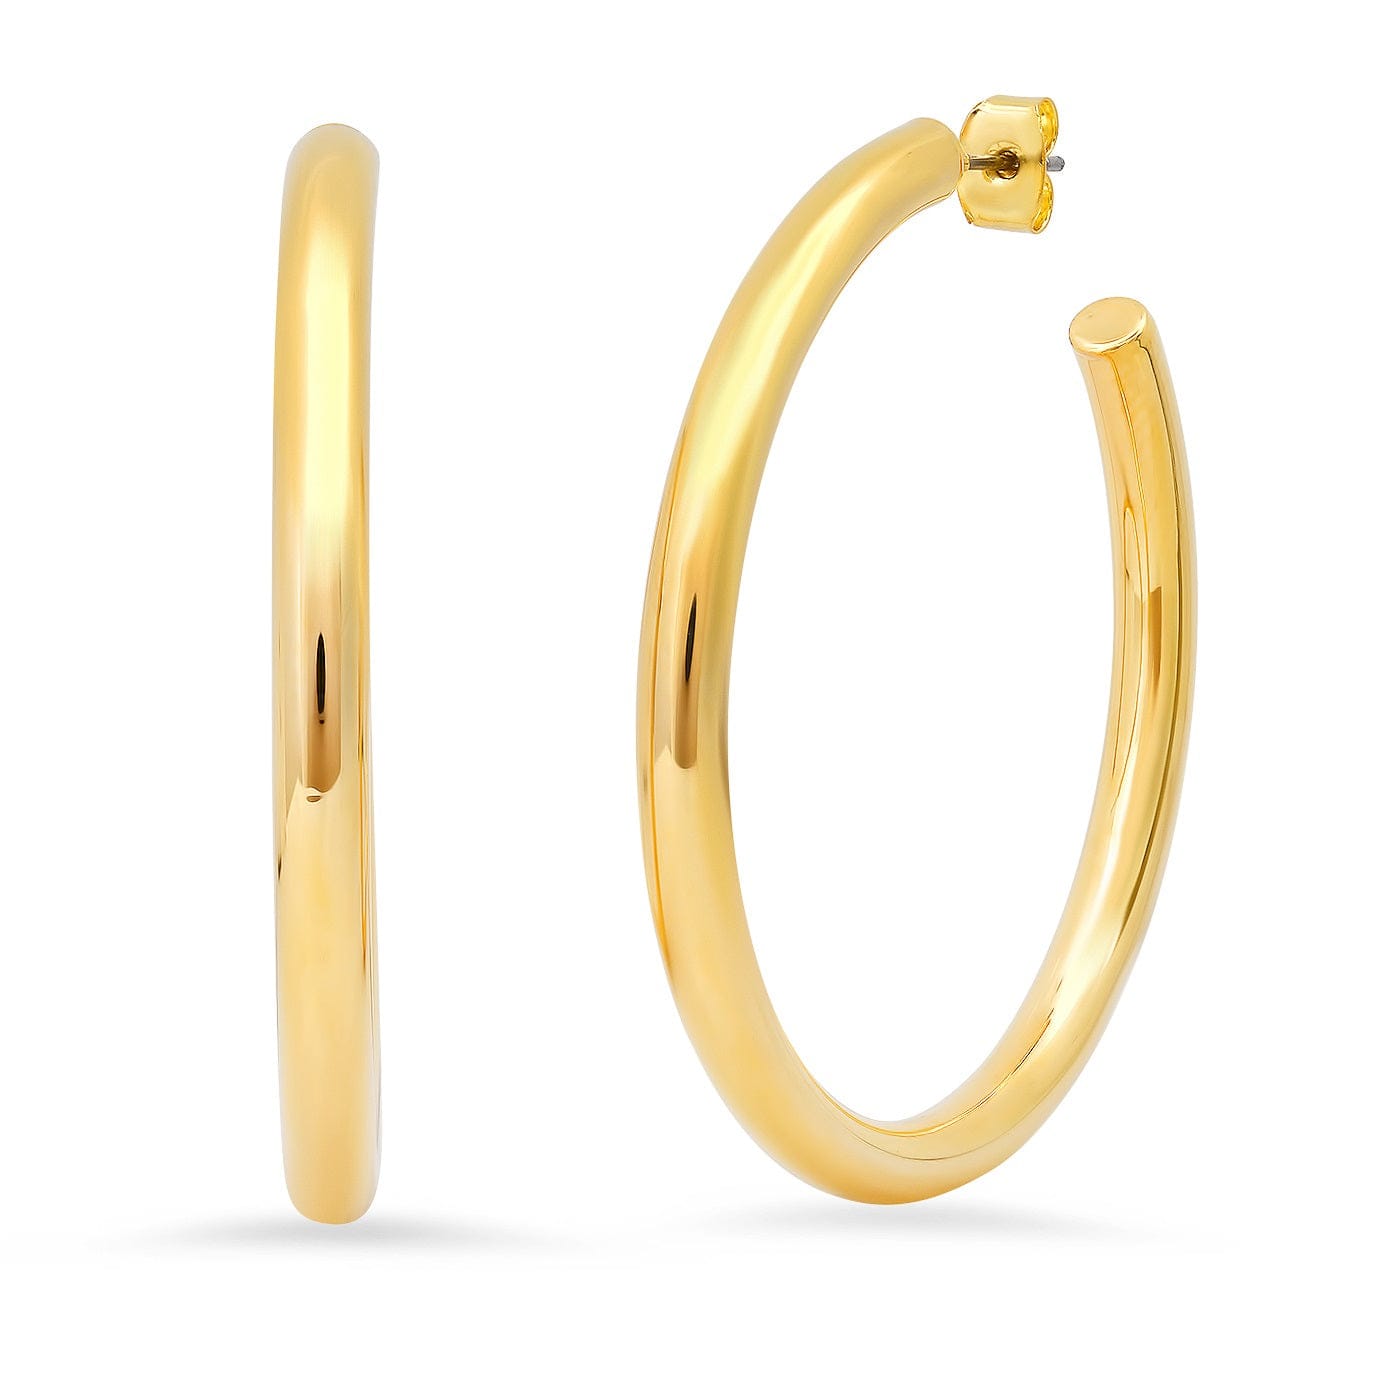 TAI JEWELRY Earrings Extra Extra Large Gold Tubular Hoops